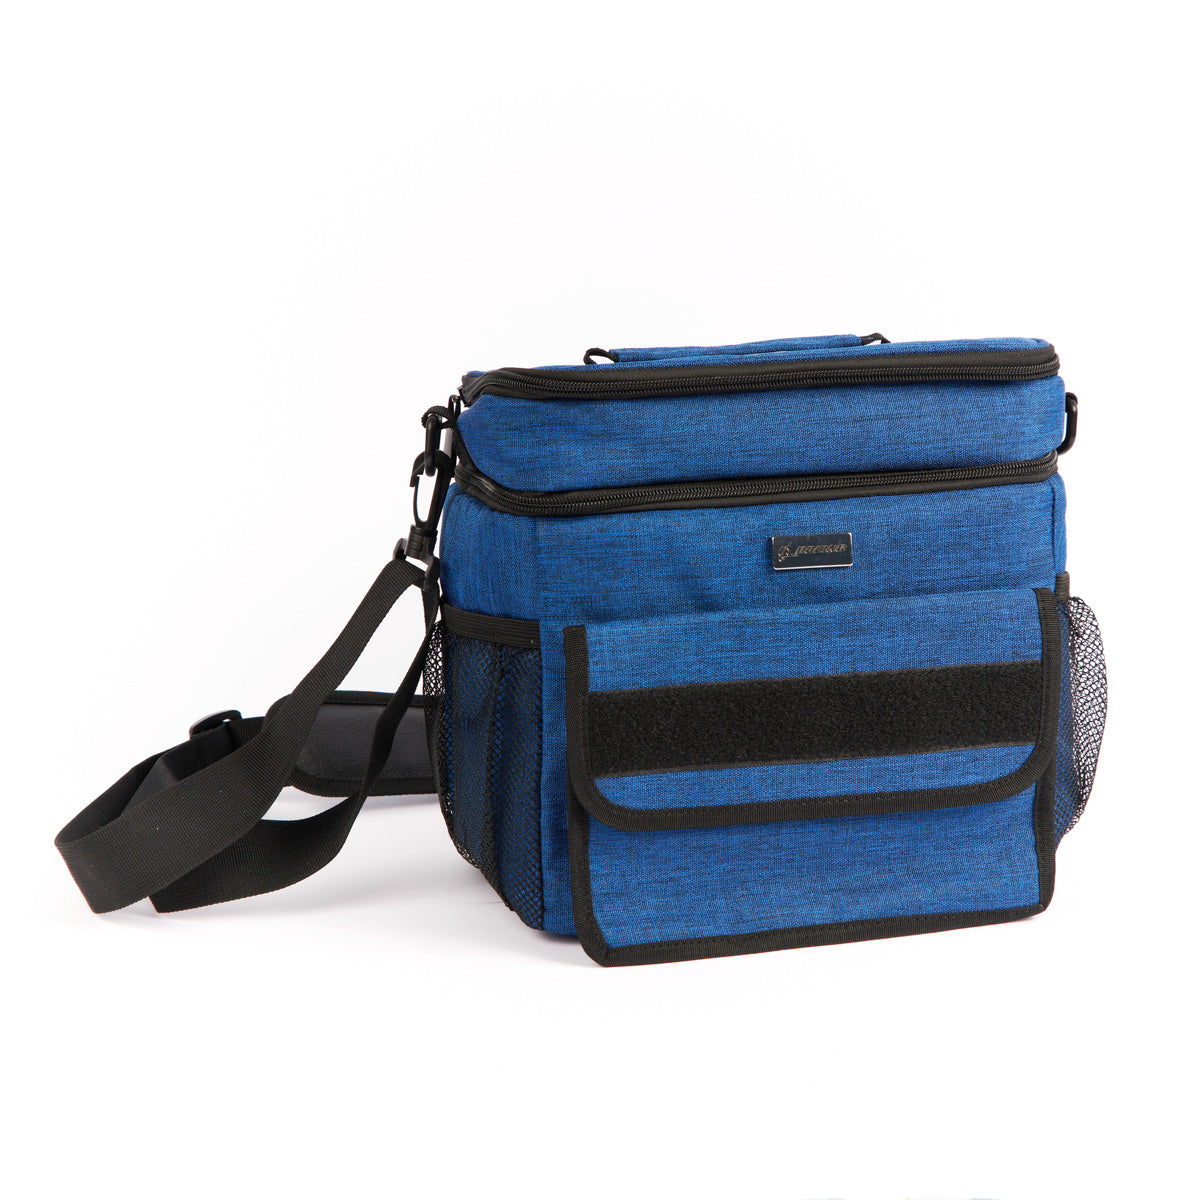 Insulated Dual Compartment Lunch Bag for Men, Women | Double Deck